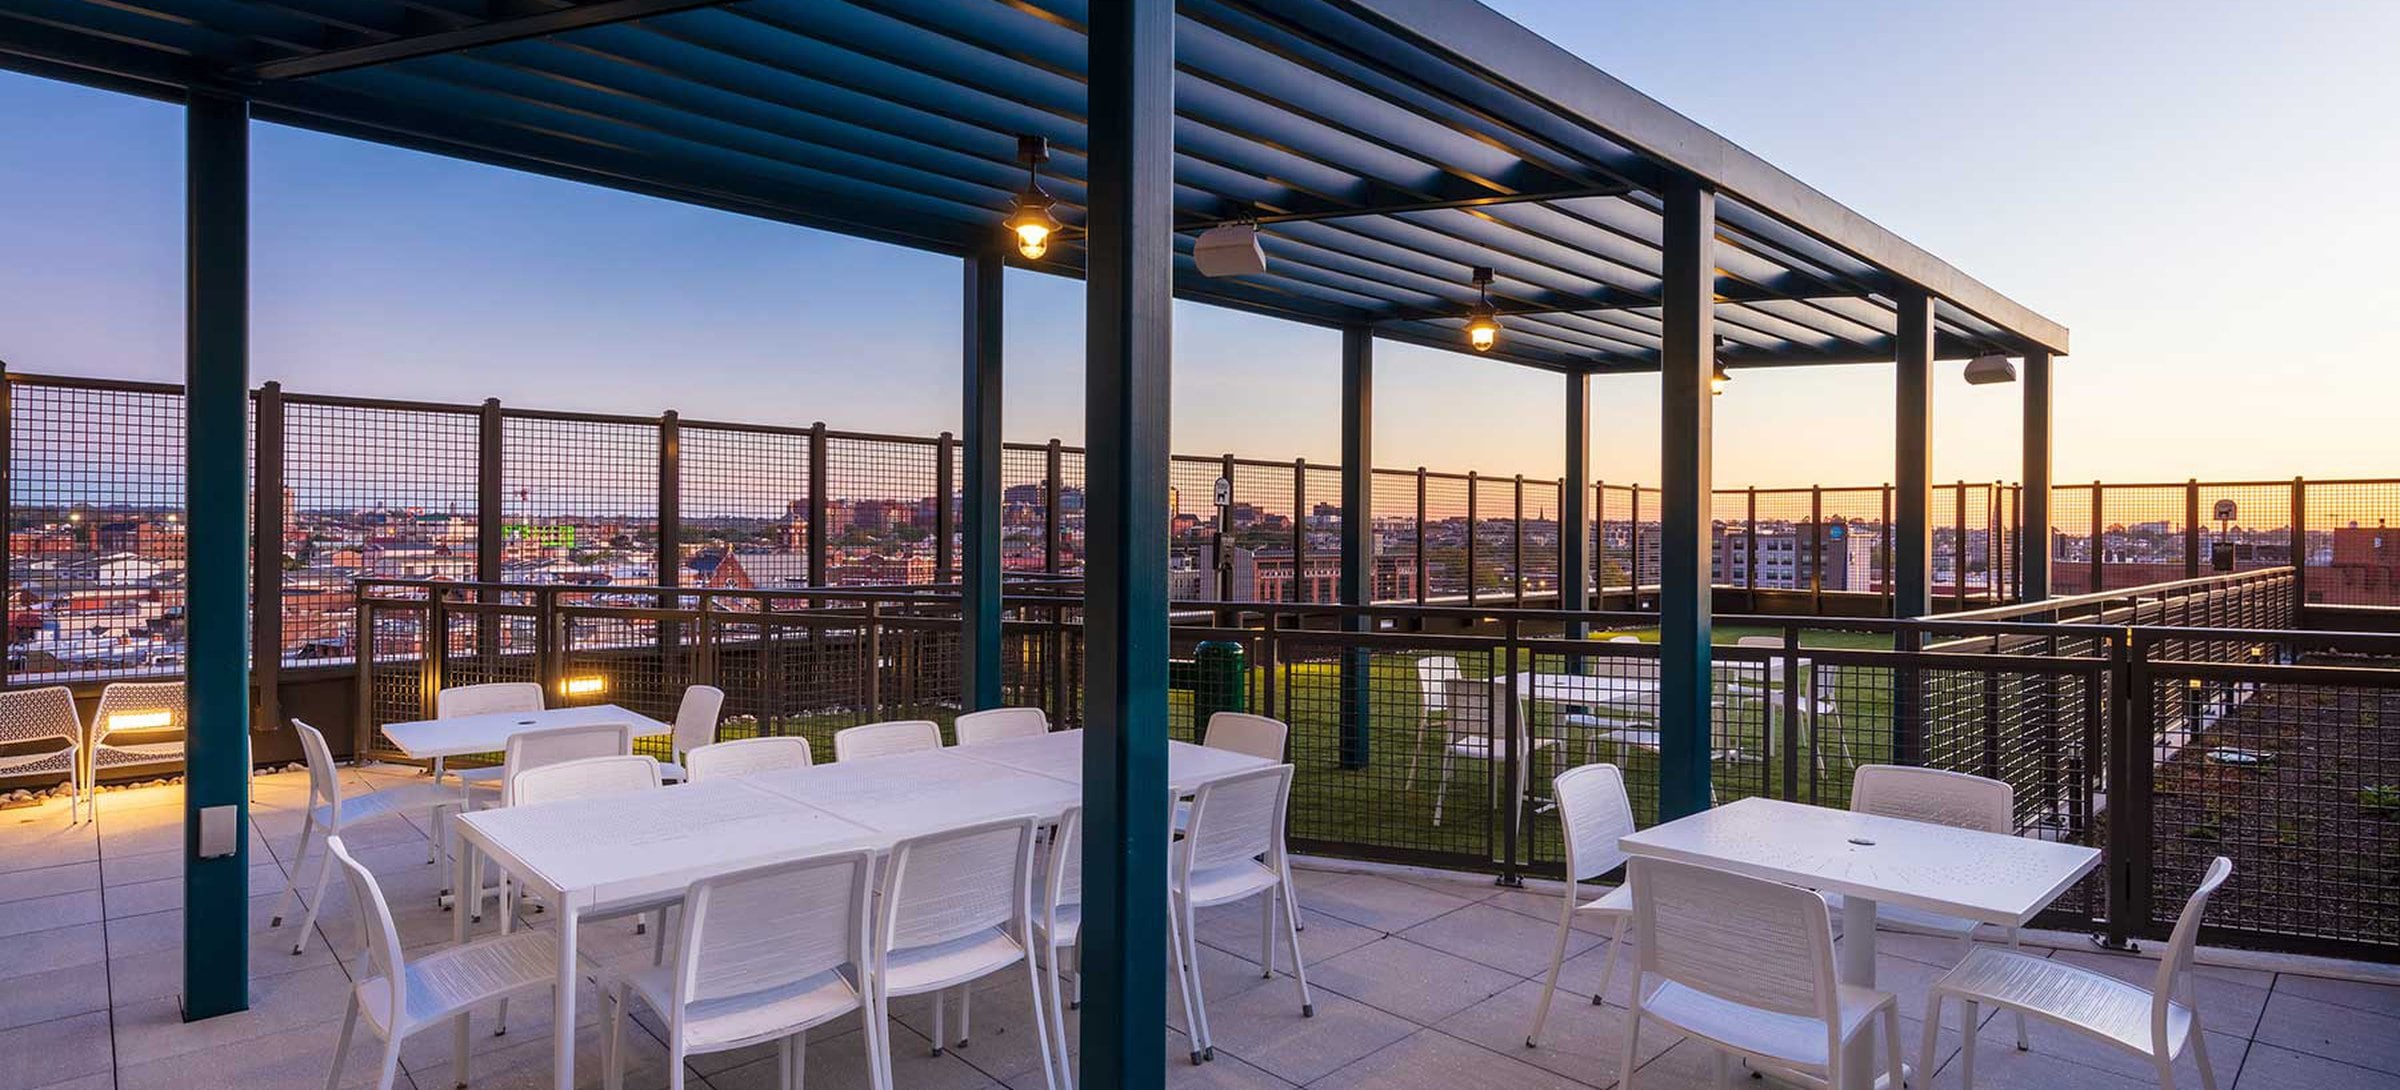 8th Floor Outdoor terrace with dining tables and seating